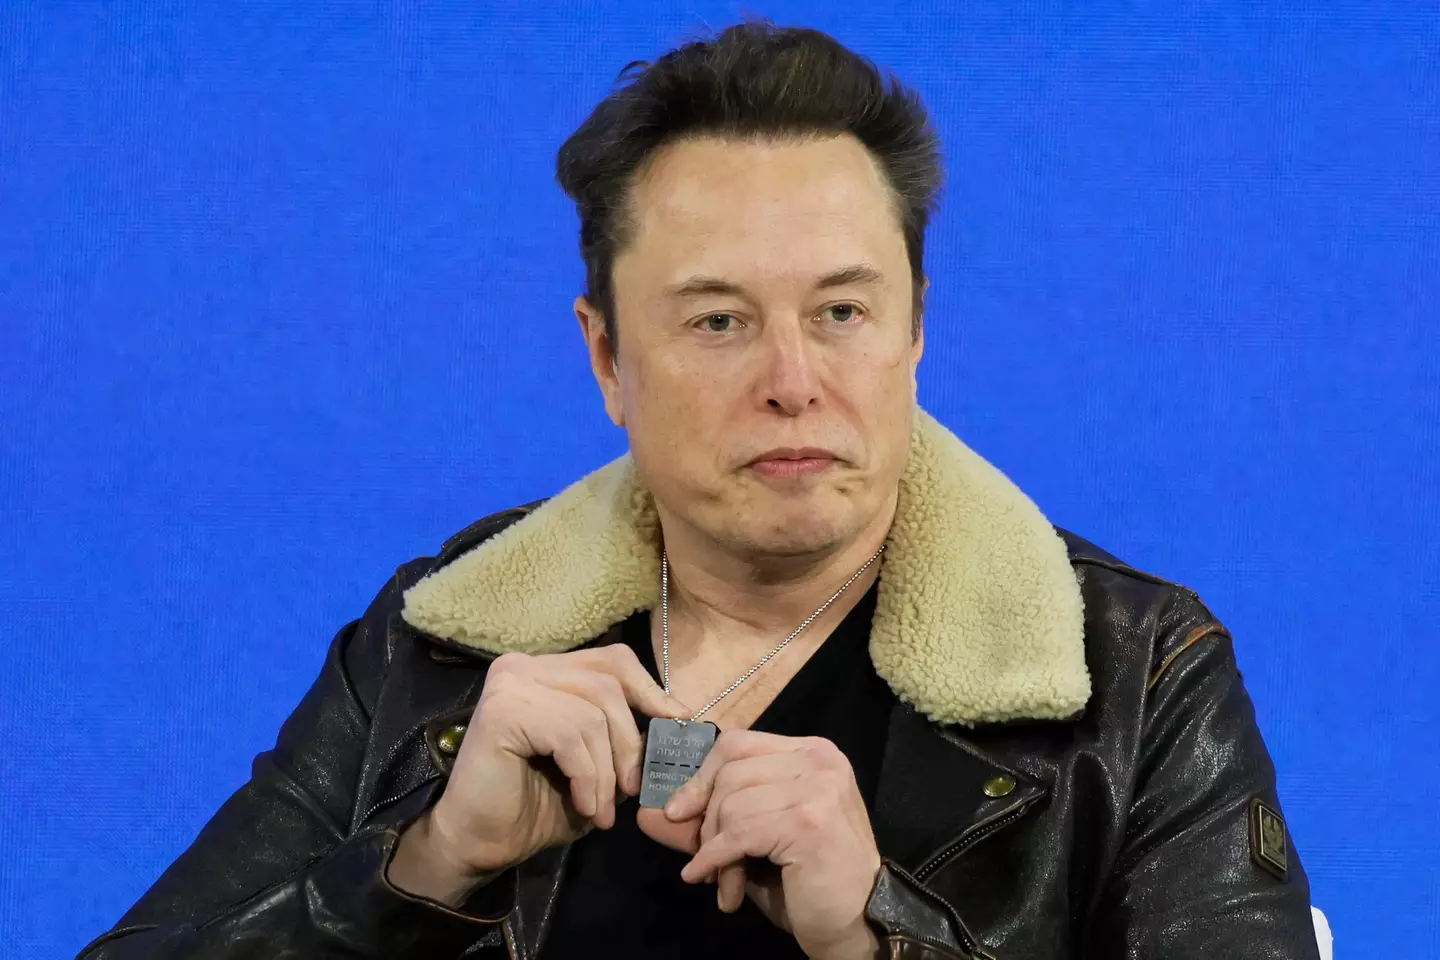 Elon Musk has been clear he thinks having kids is a good thing.